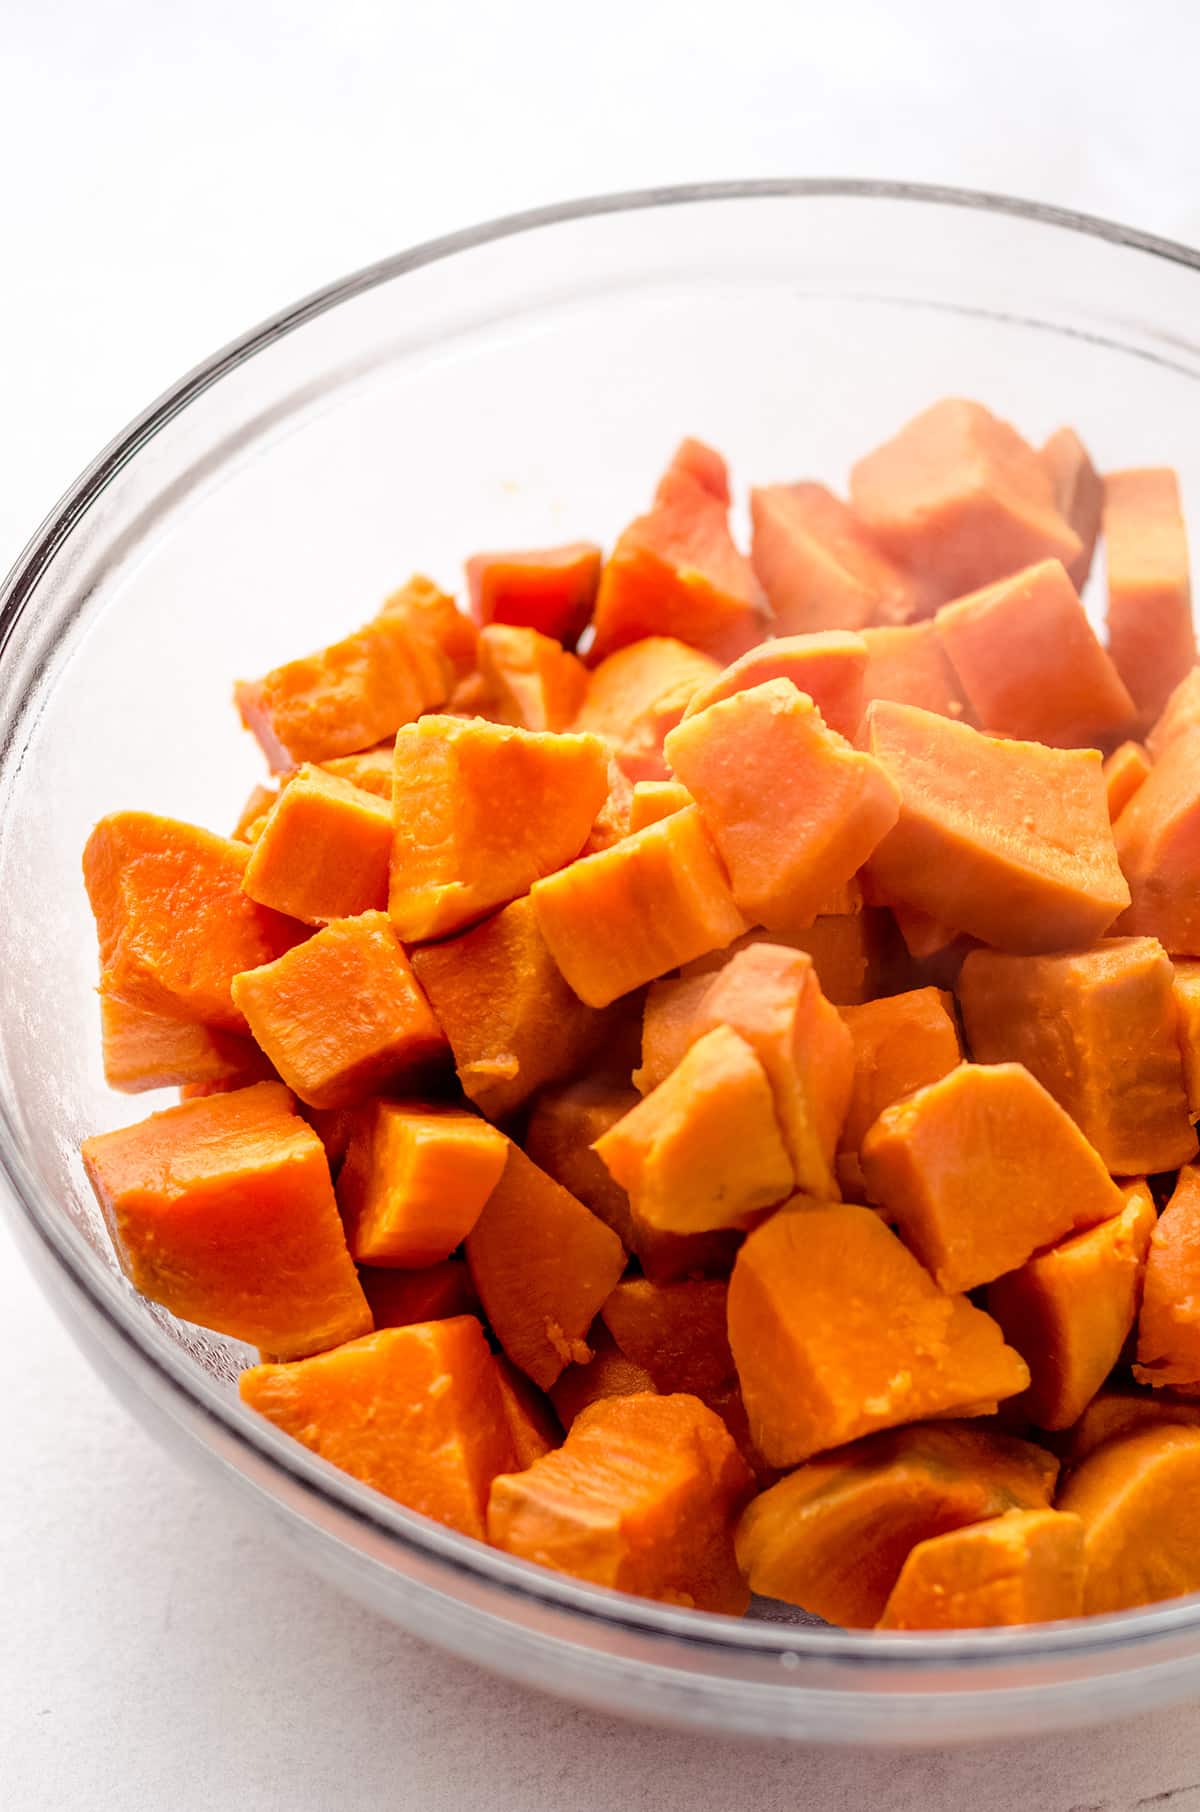 A bowl of cooked sweet potato cubes.